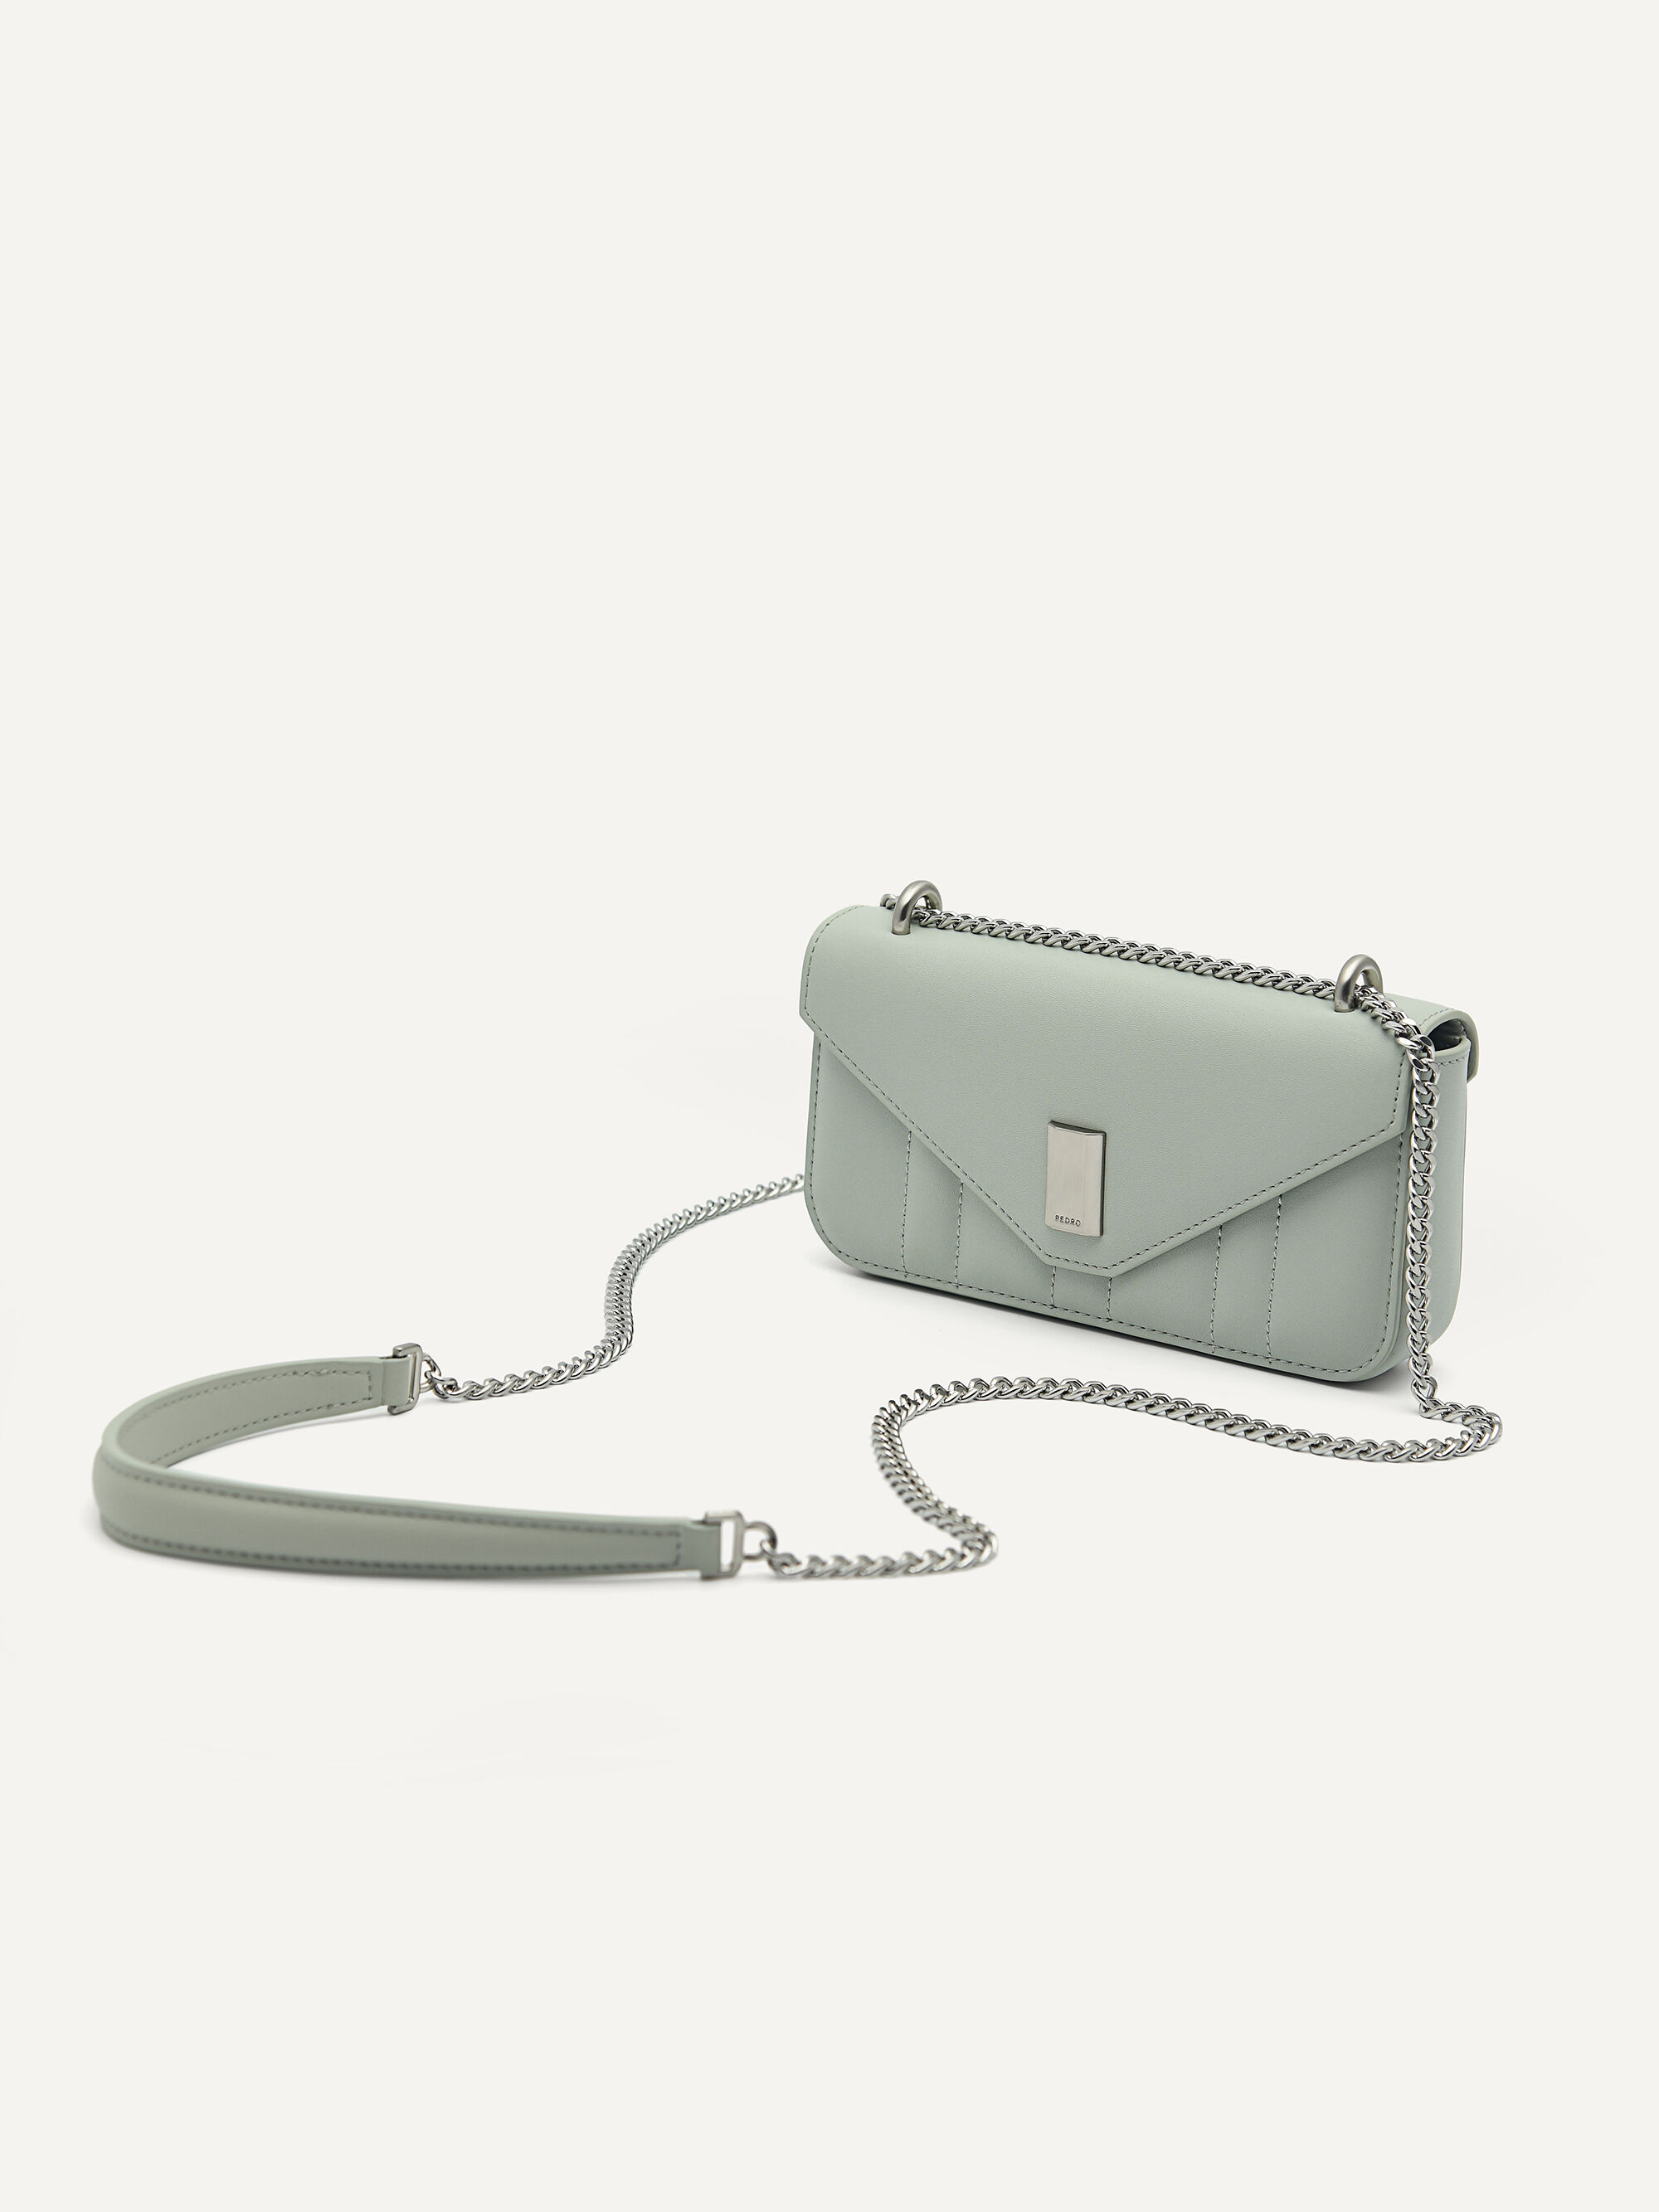 Leather Panelled Phone Pouch Bag - Light Green